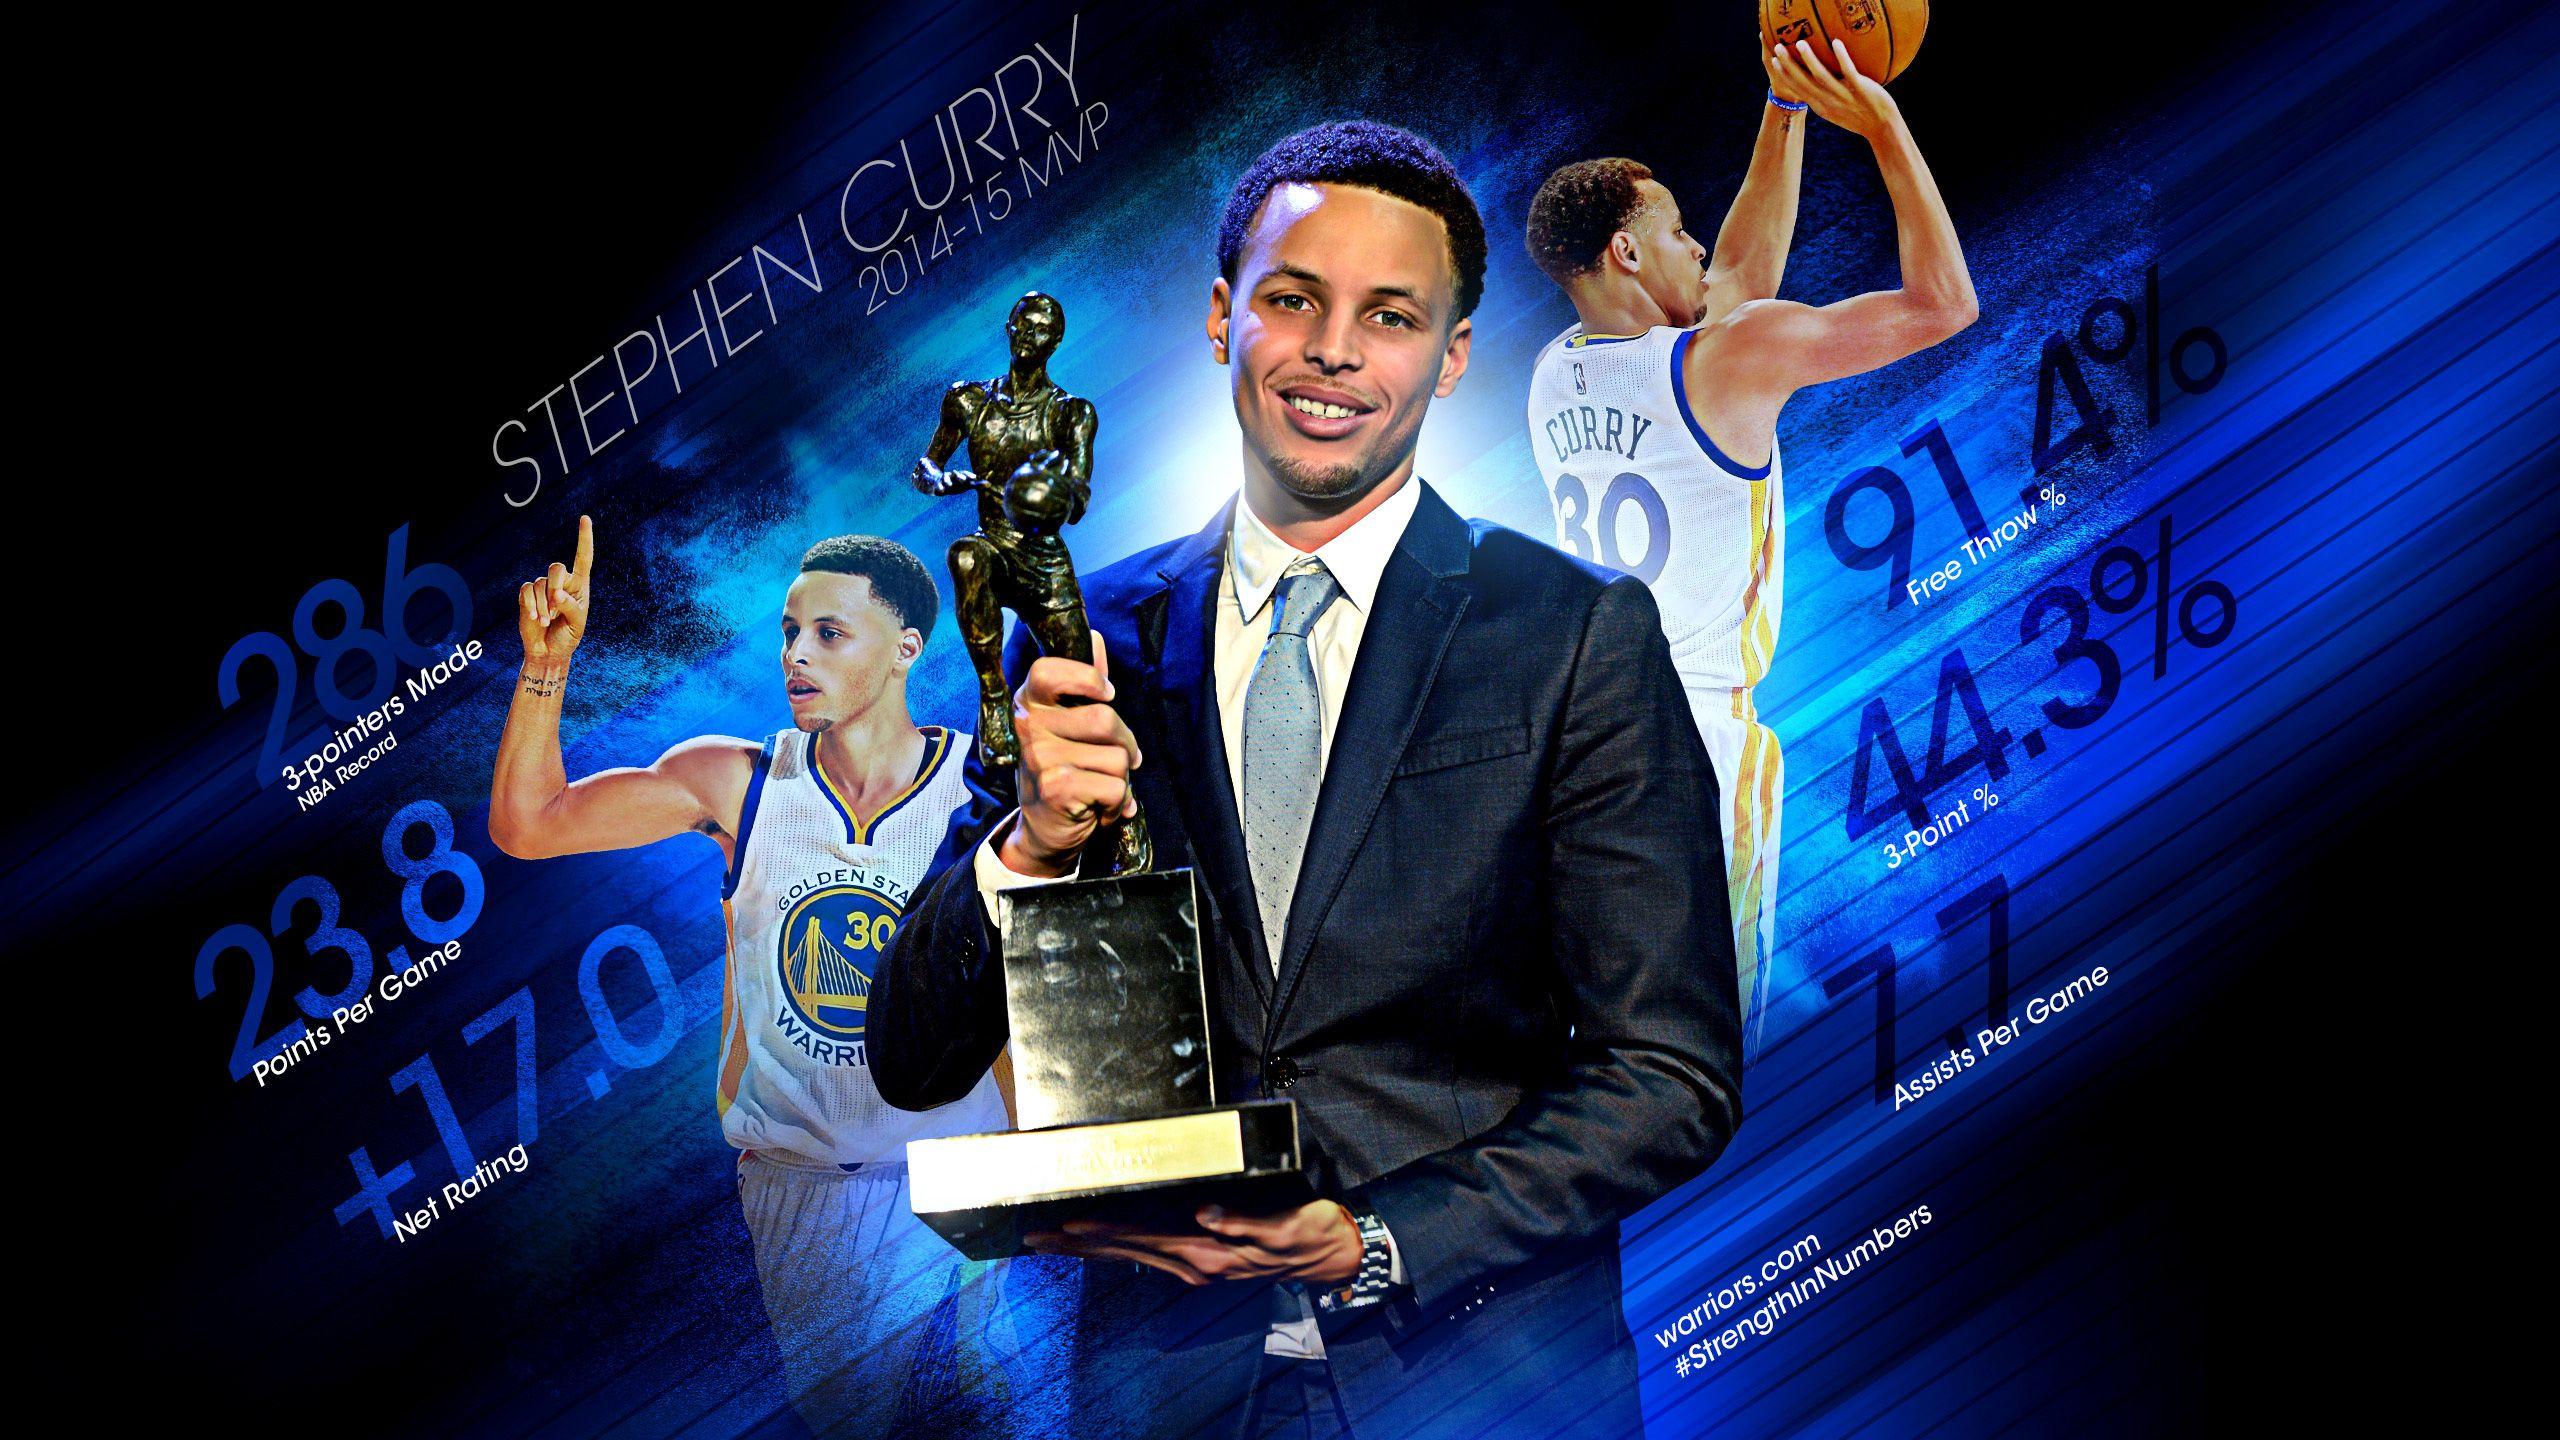 Wallpaper.wiki Stephen Curry Android Wallpaper Free Download PIC